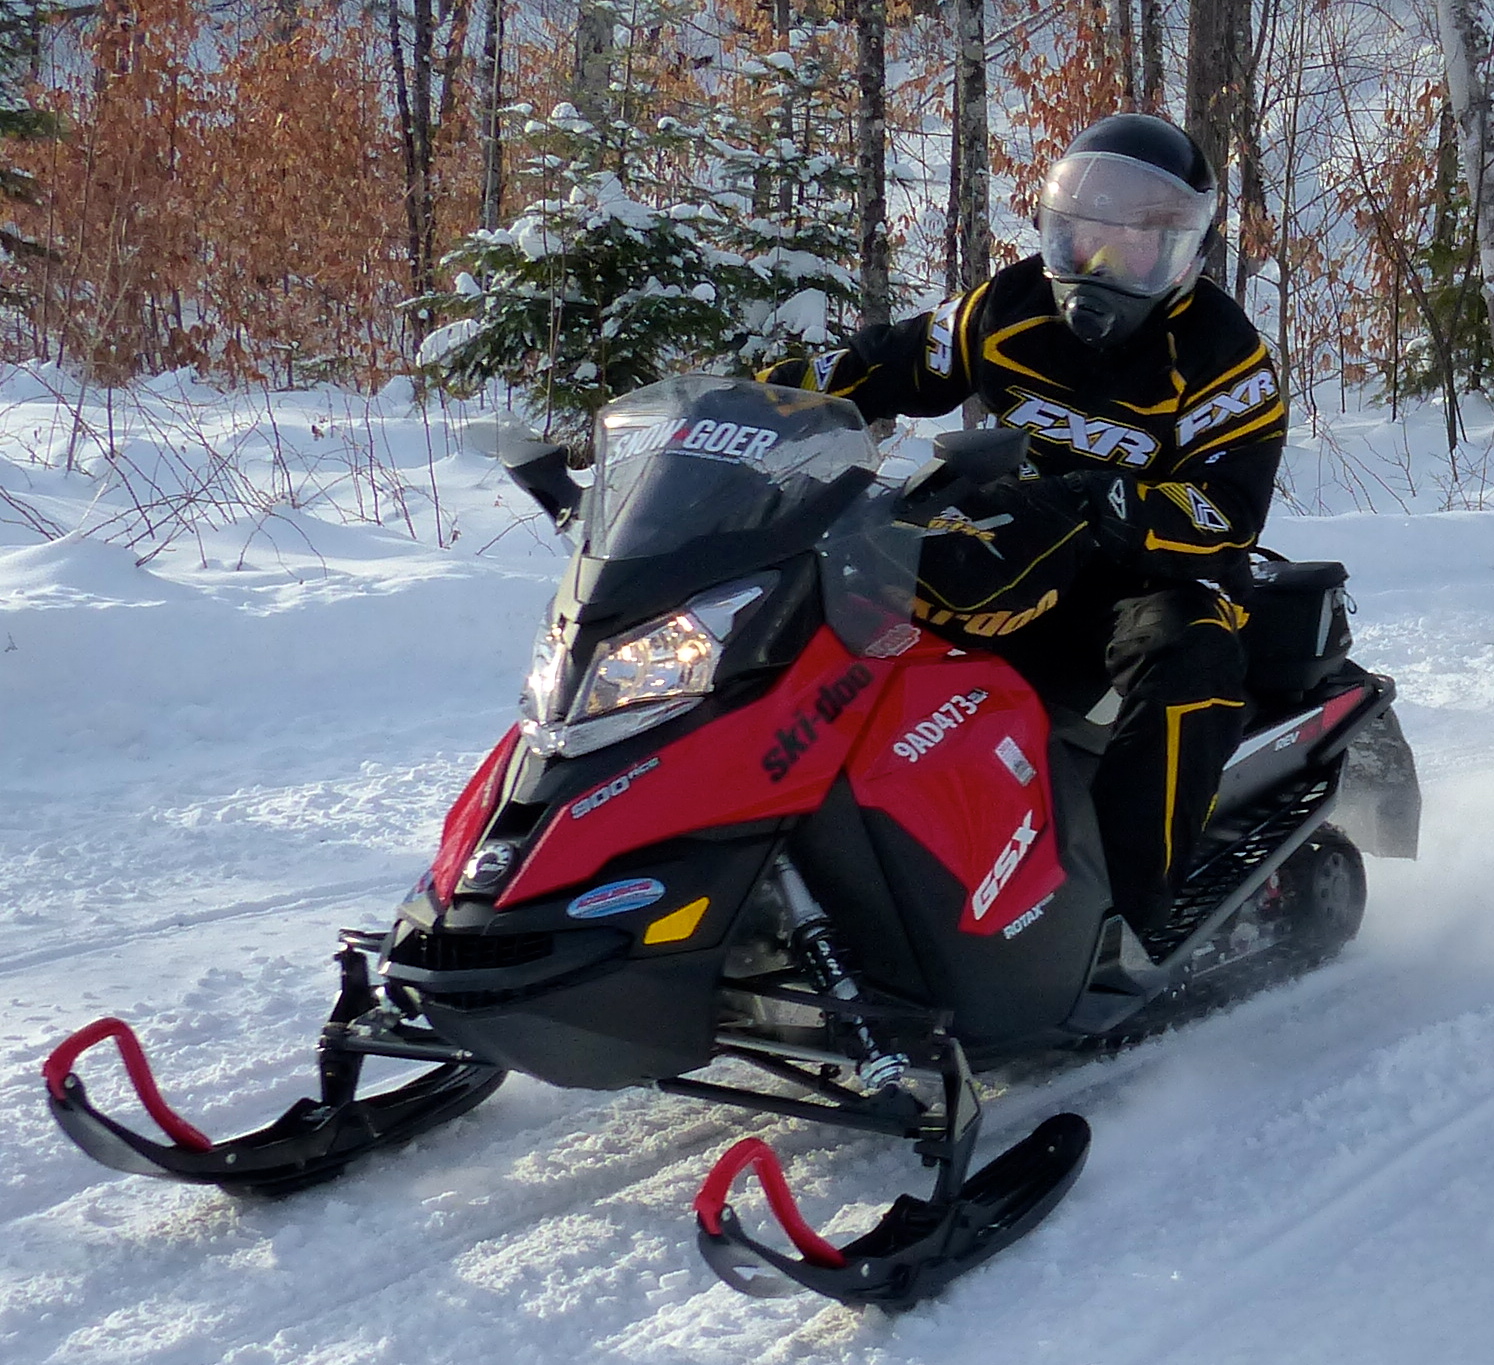 900 ACE Rotax Snowmobile Engine Product Review